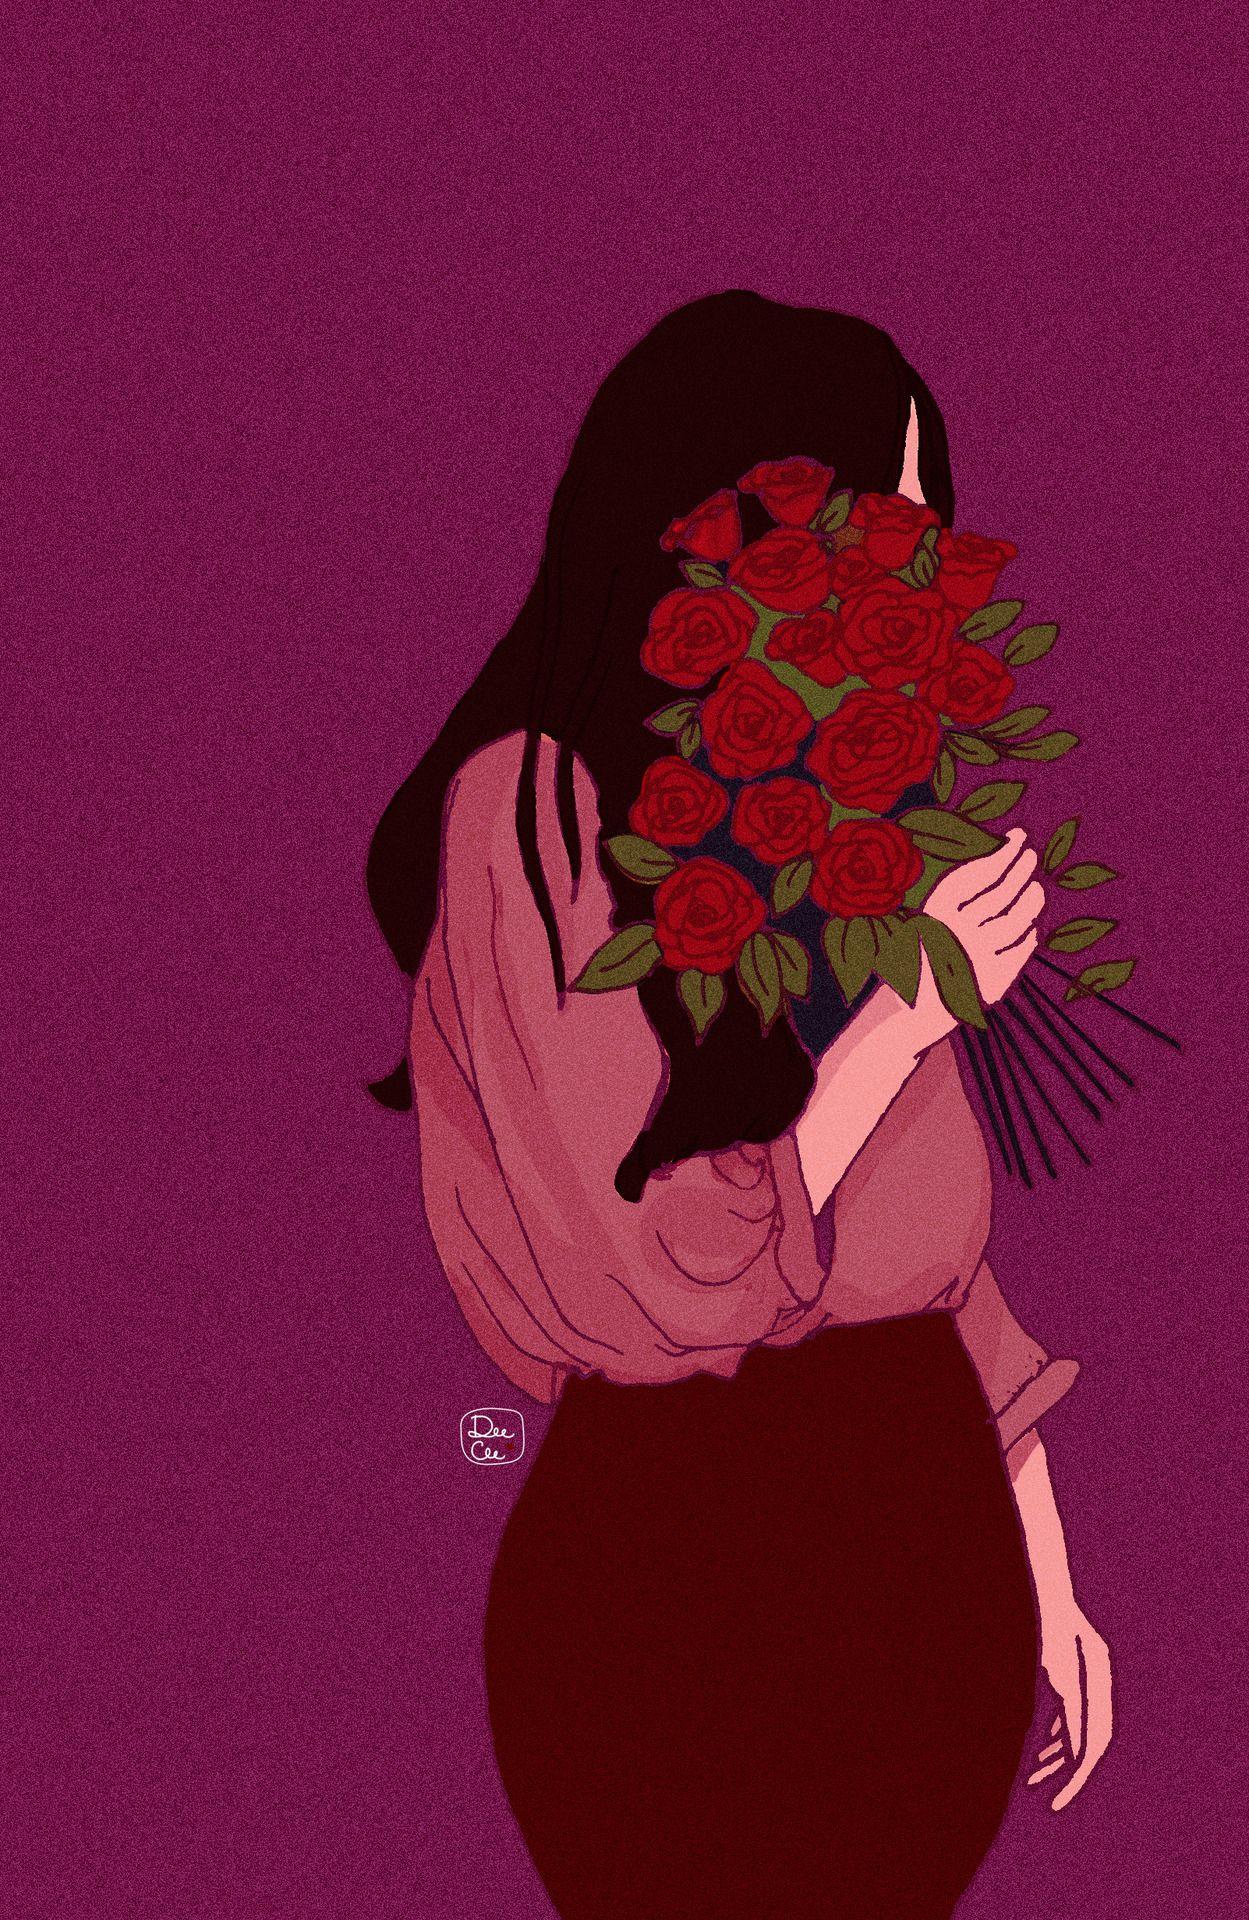 Love for Roses. art and illustration. Aesthetic